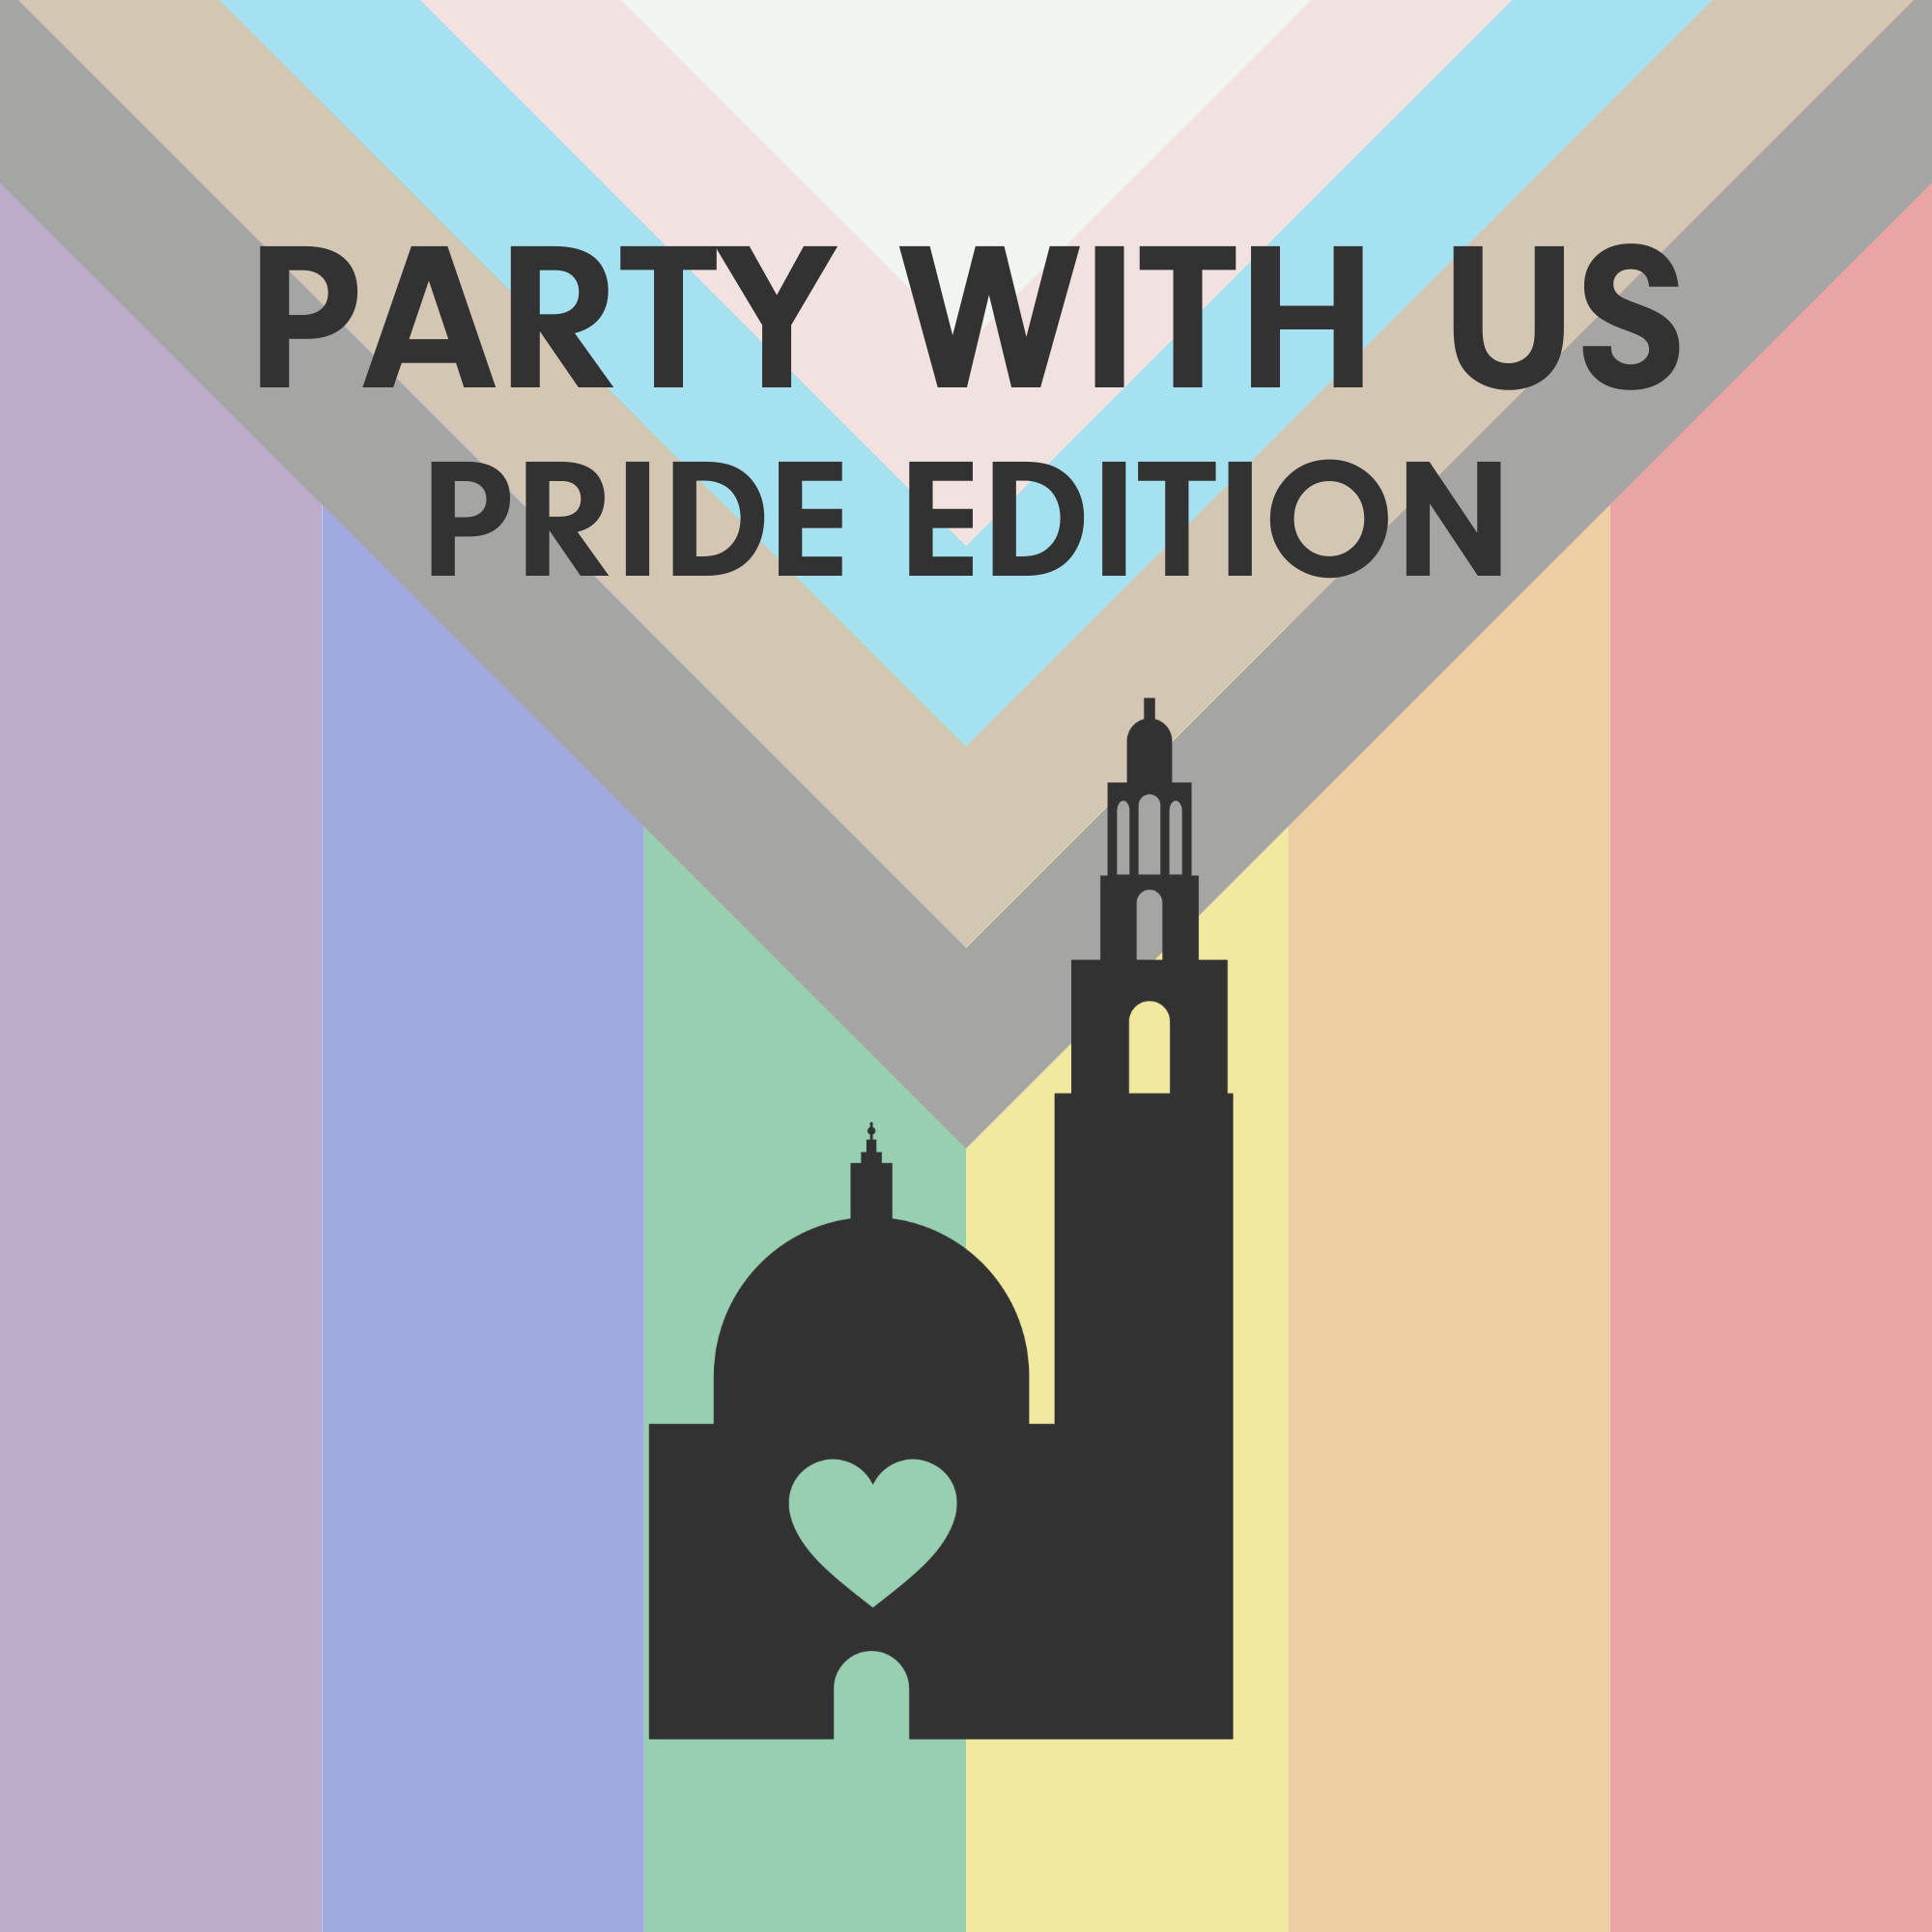 A square with a progress pride flag as the background, and dark off-black text that reads "Party with Us Pride Edition" on top of an off-black California Tower logo.